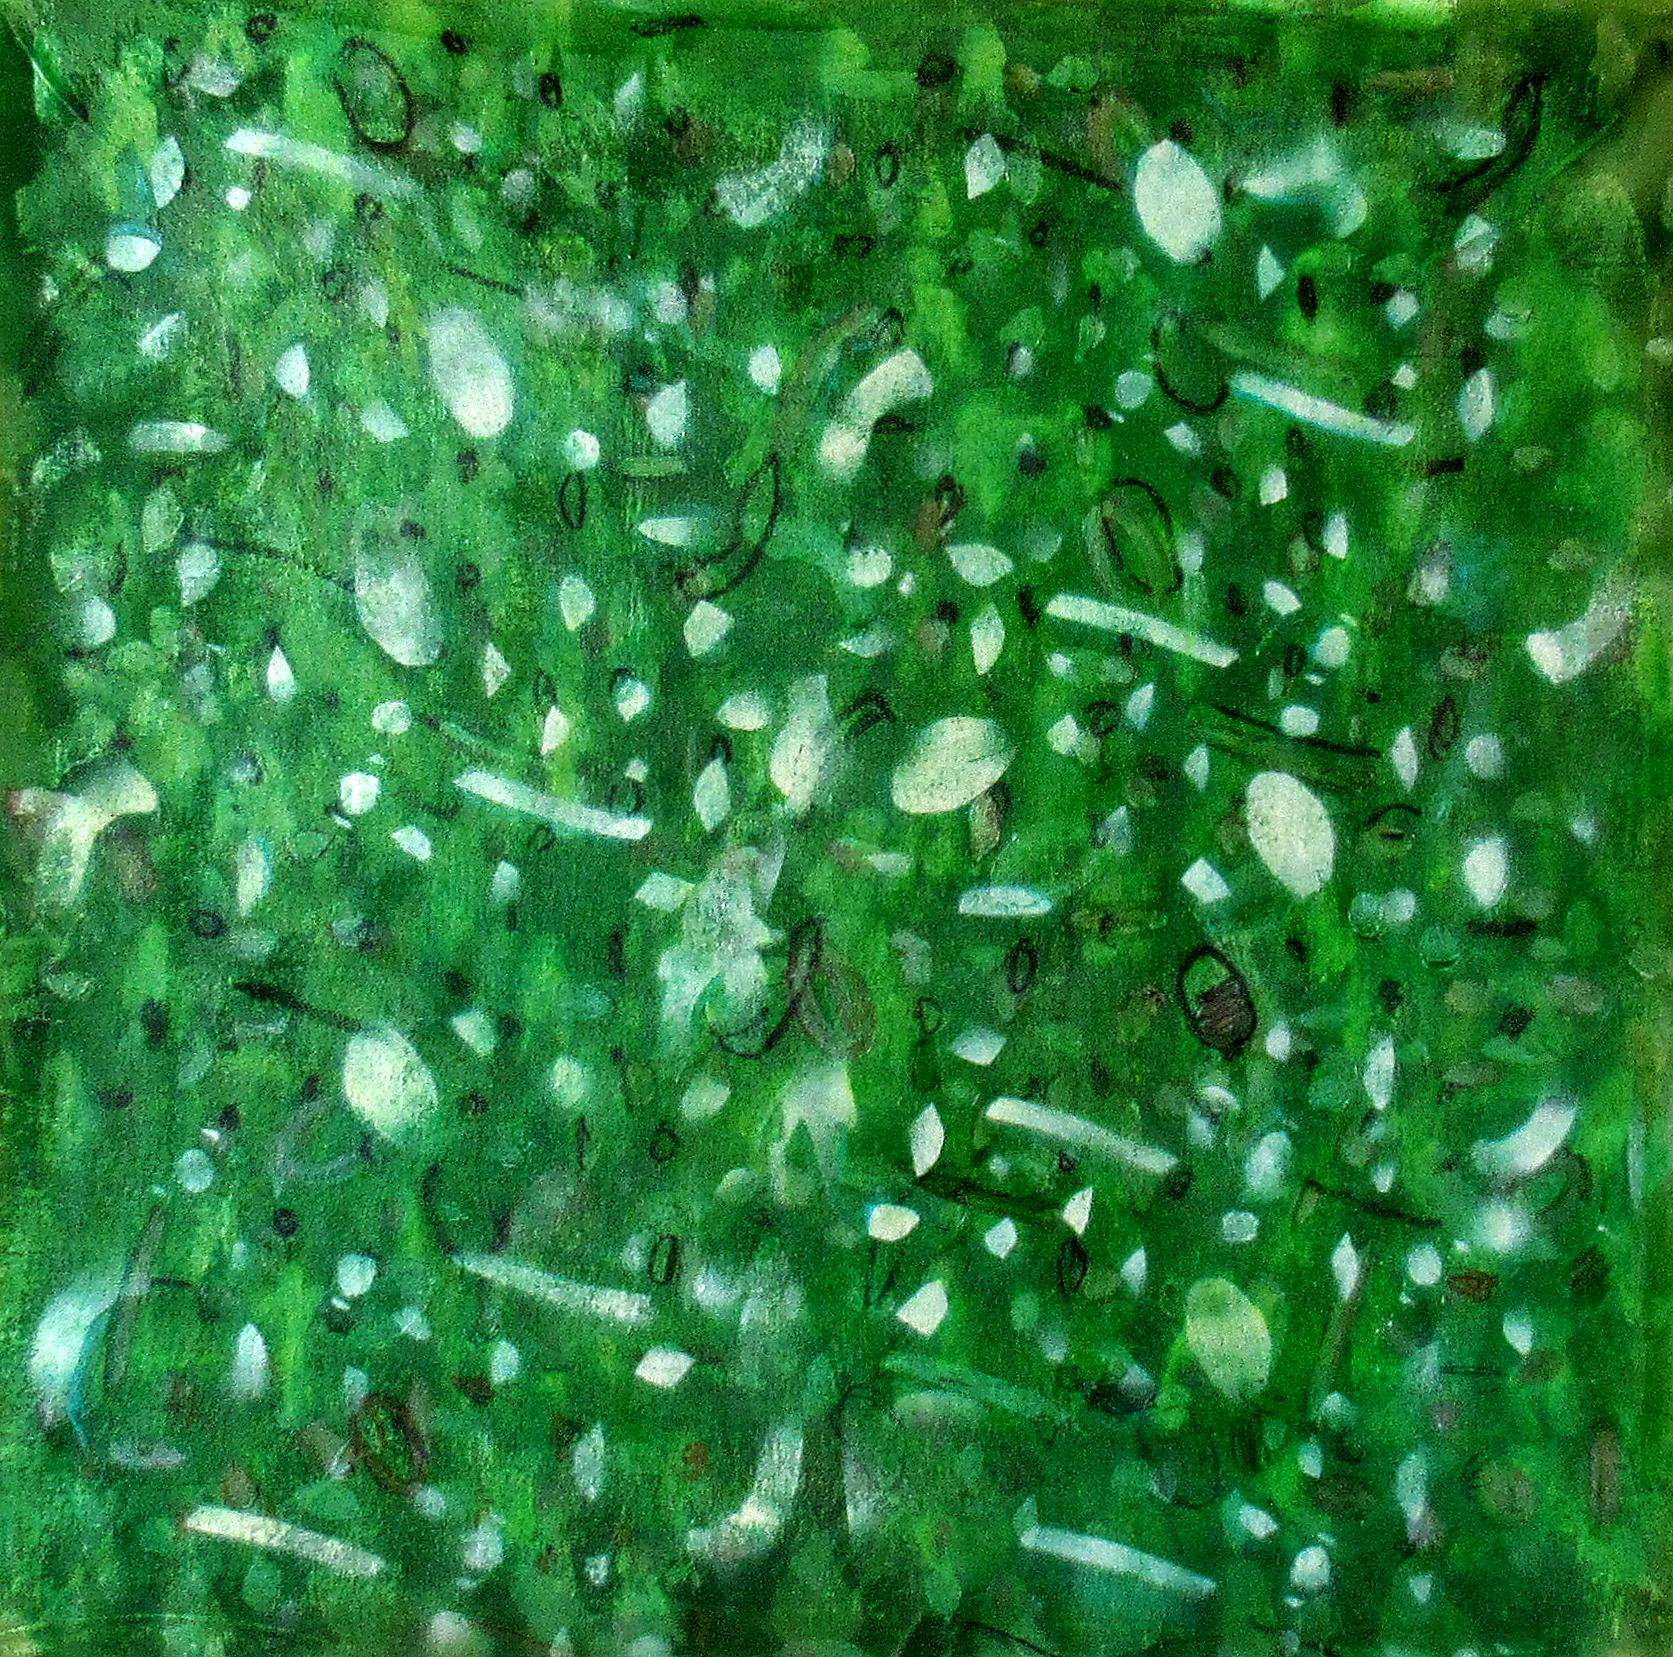 C. Dimitri Abstract Painting - Subatomic Two, colorful, green, patterns, abstract